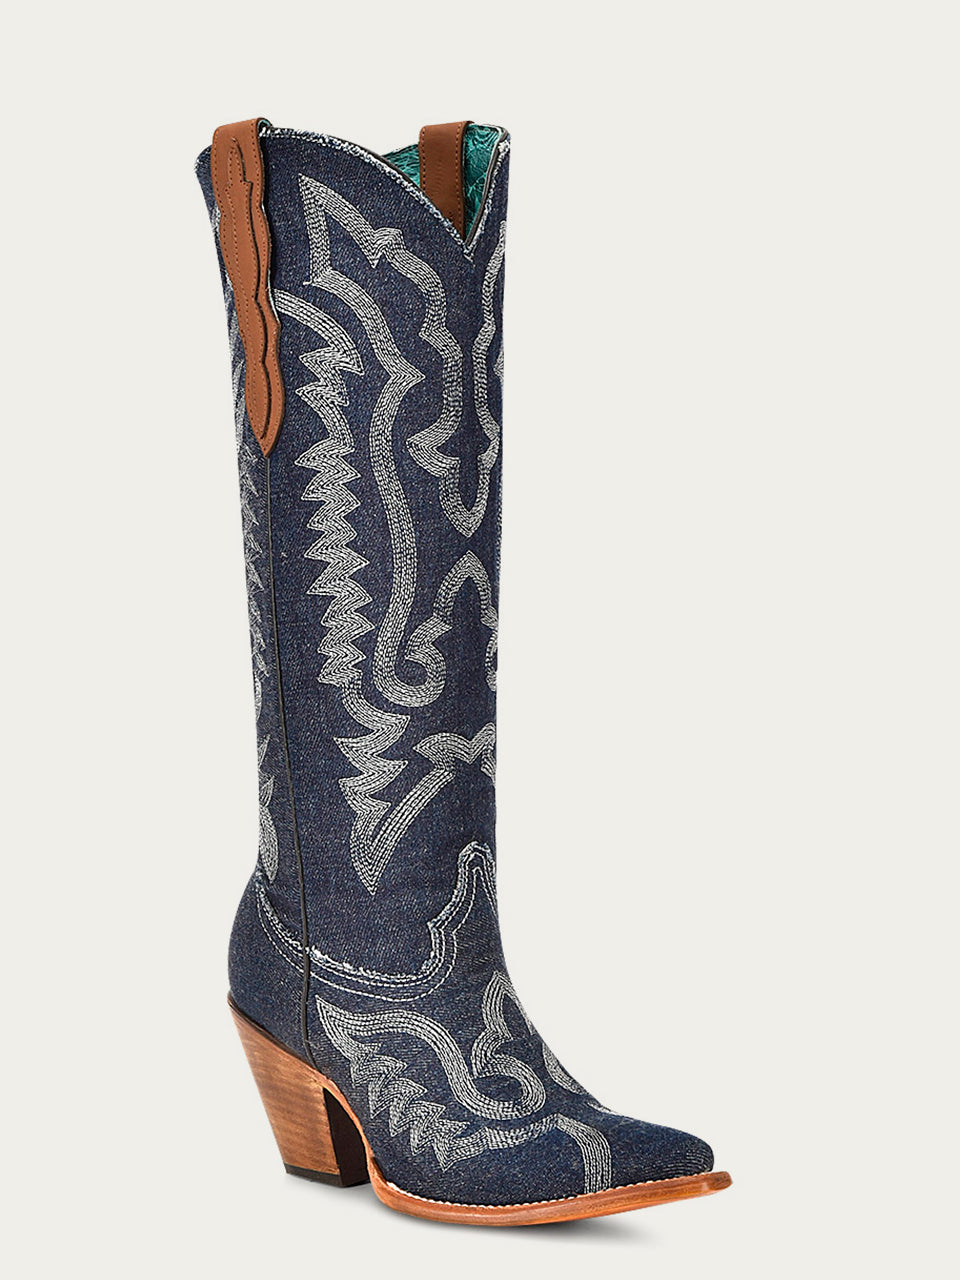 Z5226 - WOMEN'S WHITE EMBROIDERY DENIM TALL TOP POINTED TOE COWBOY BOOT